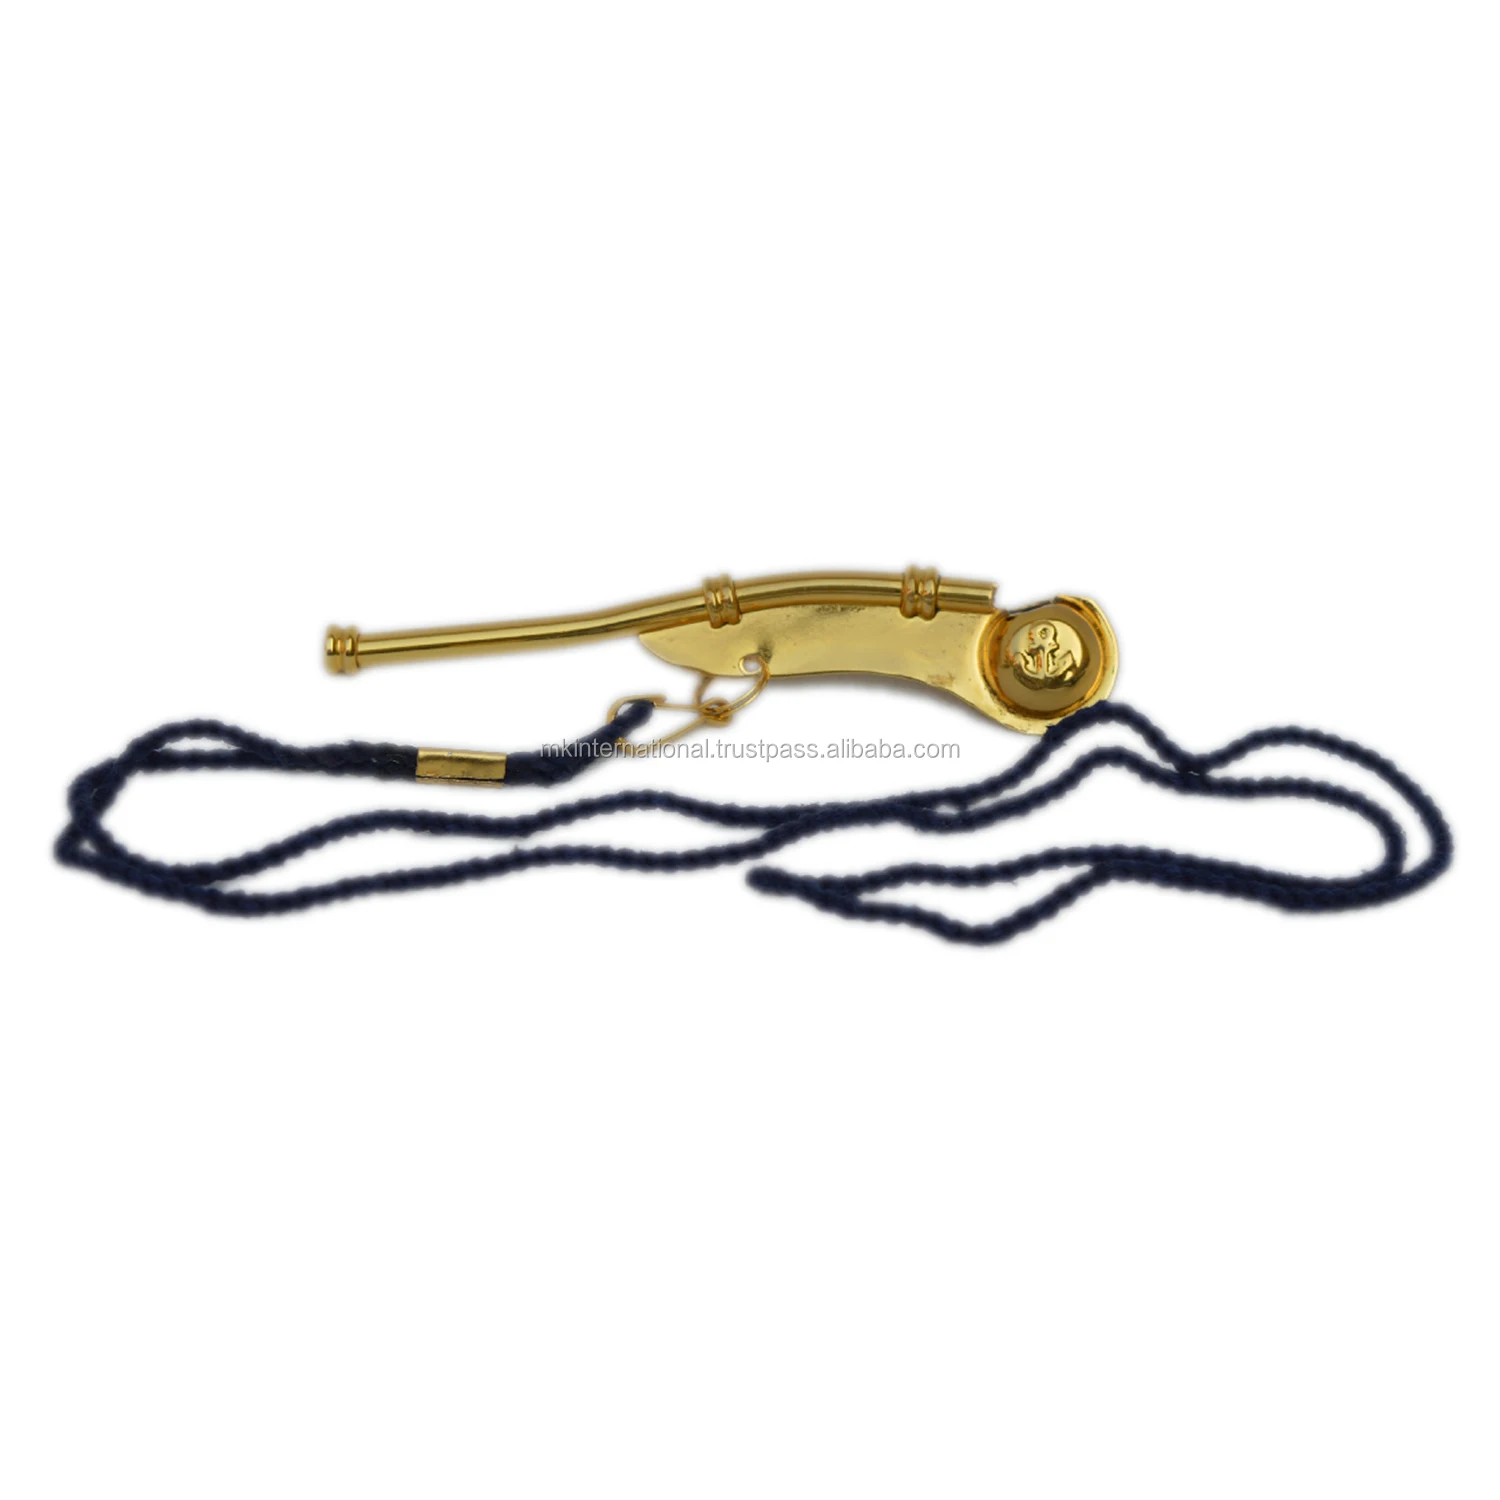 Copper Boatswain Whistle Brass Necklace Pendant Charm Navy Bosun Call Pipe 